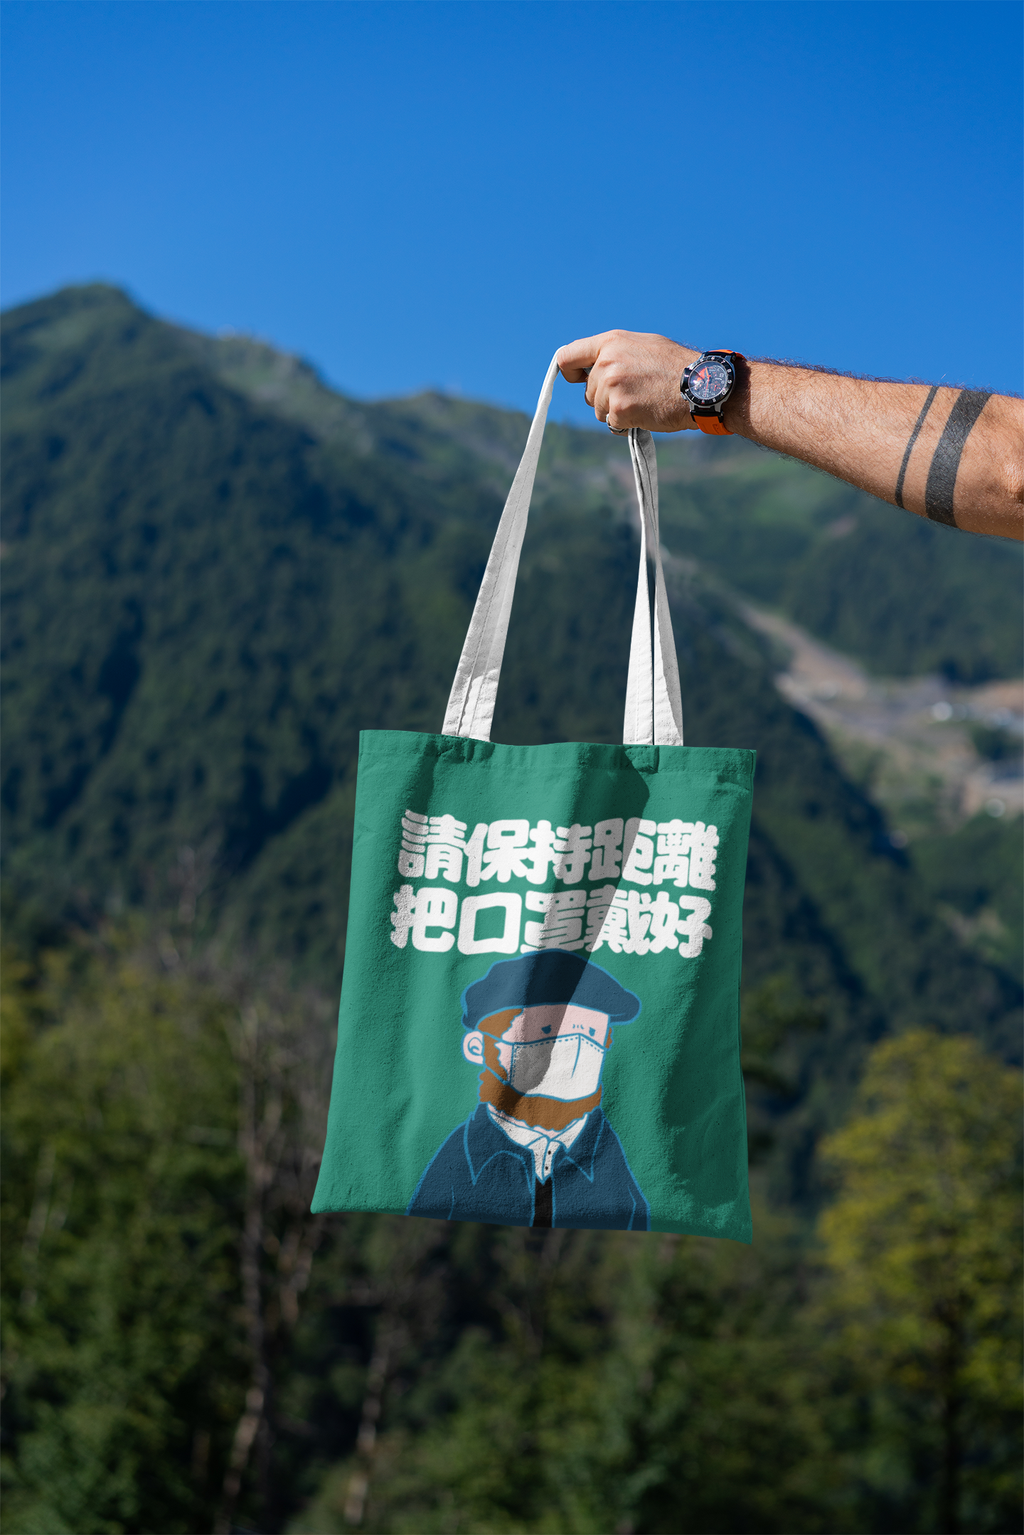 mockup-featuring-a-man-s-hand-holding-a-tote-bag-against-a-natural-scenery-3131-el1 (32).png